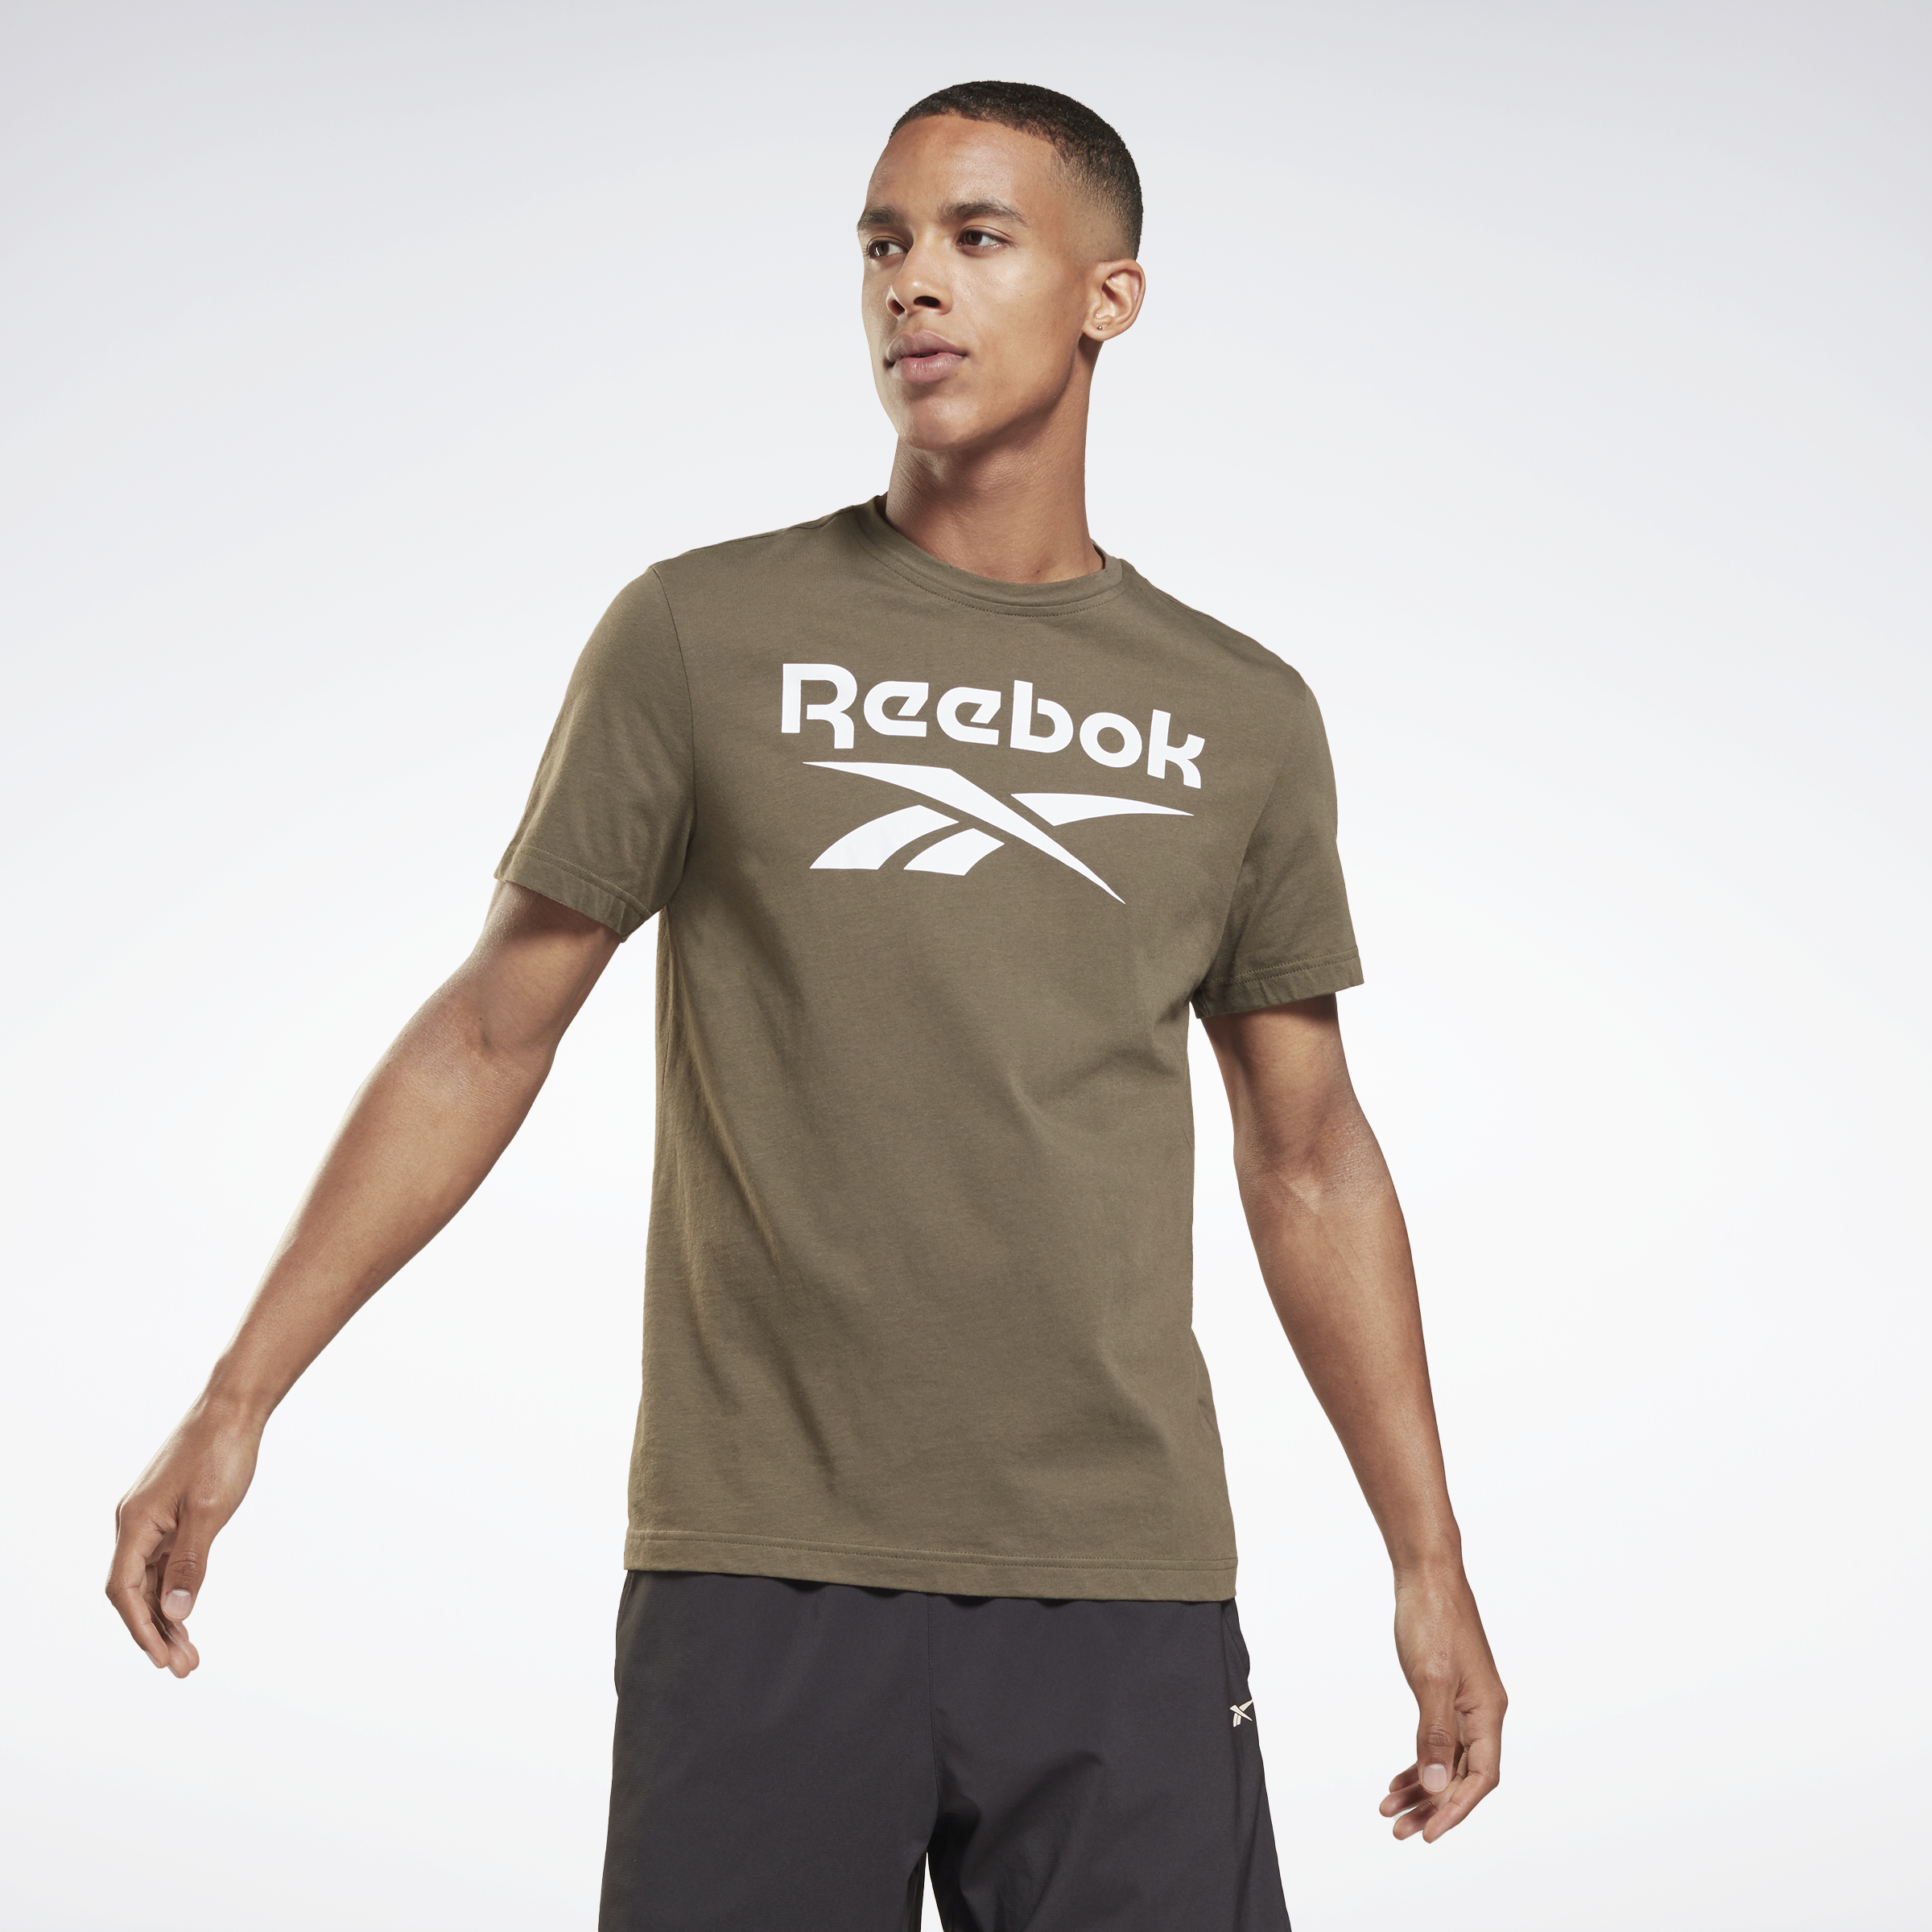 Reebok Men's Graphic Logo Series Stacked Tee 4 for $25.56 ($6.39 each) + free shipping